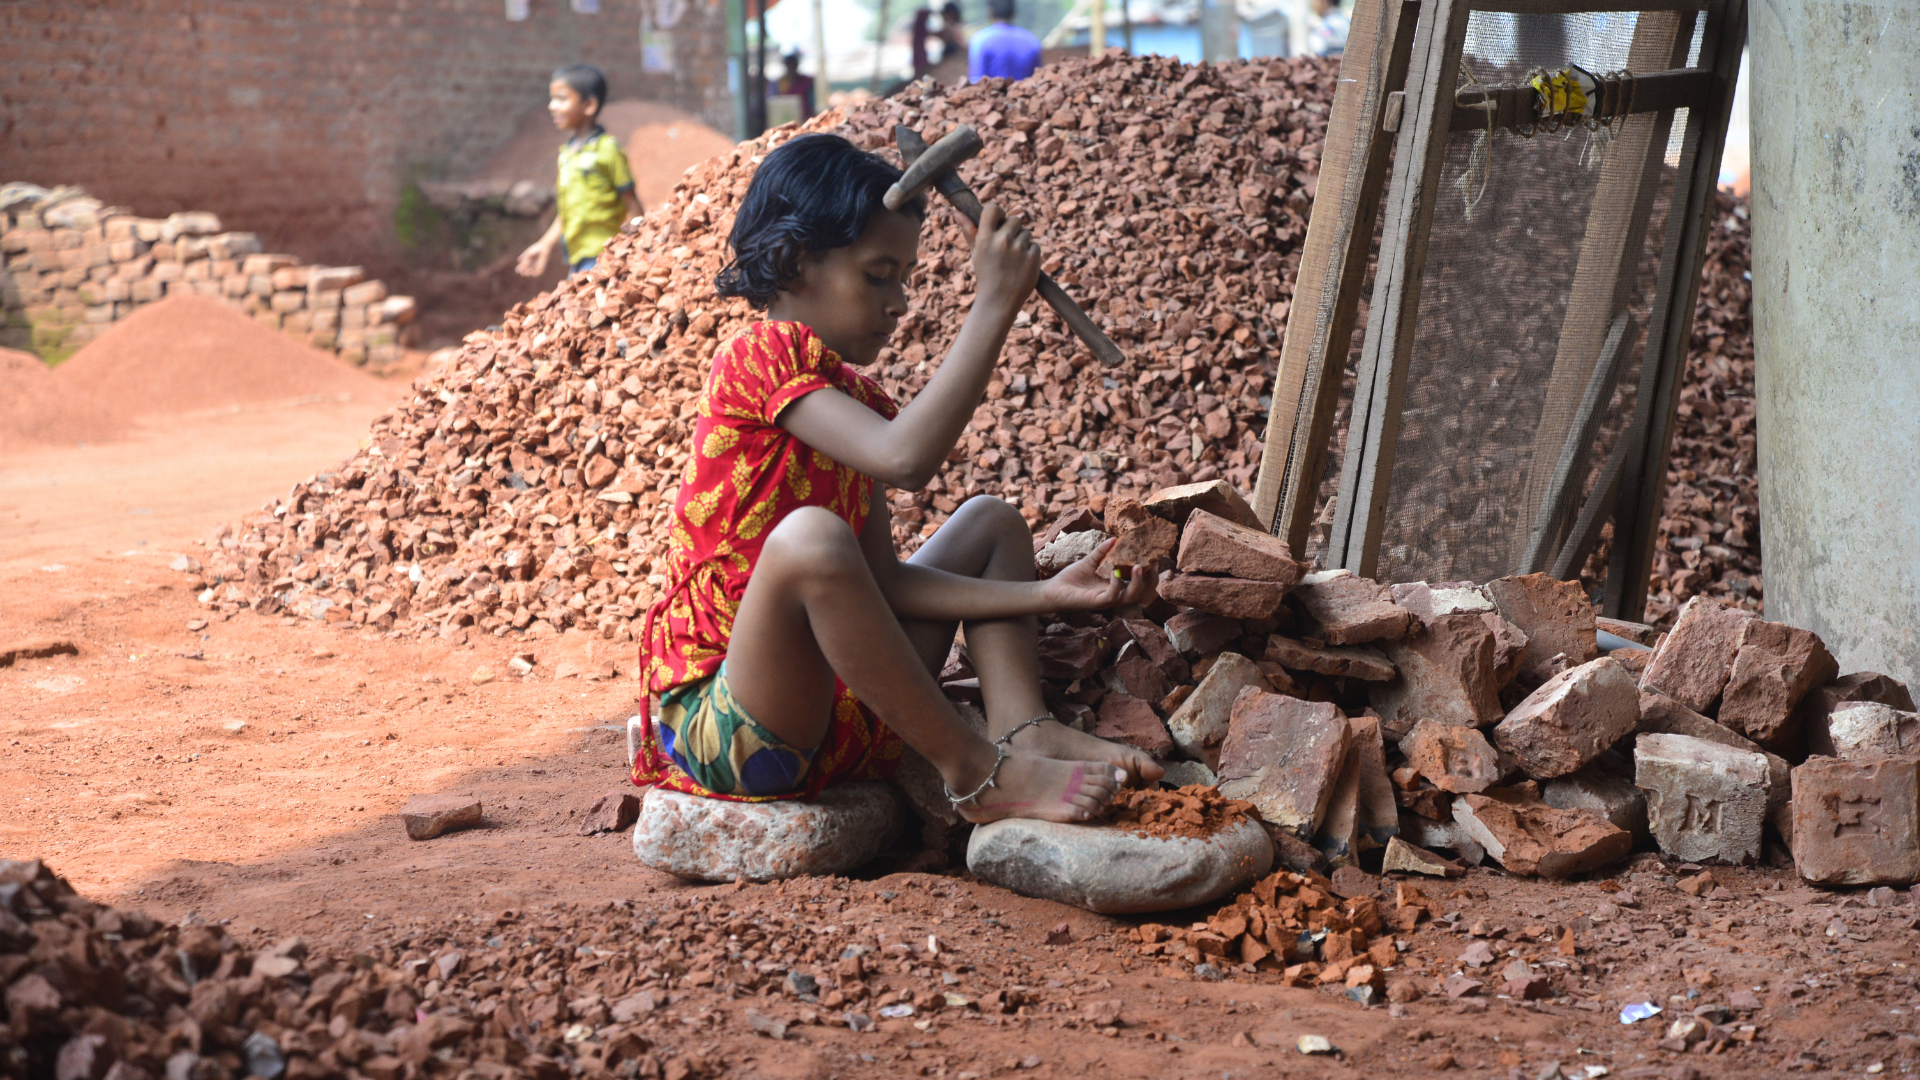 Fighting child labour with education 